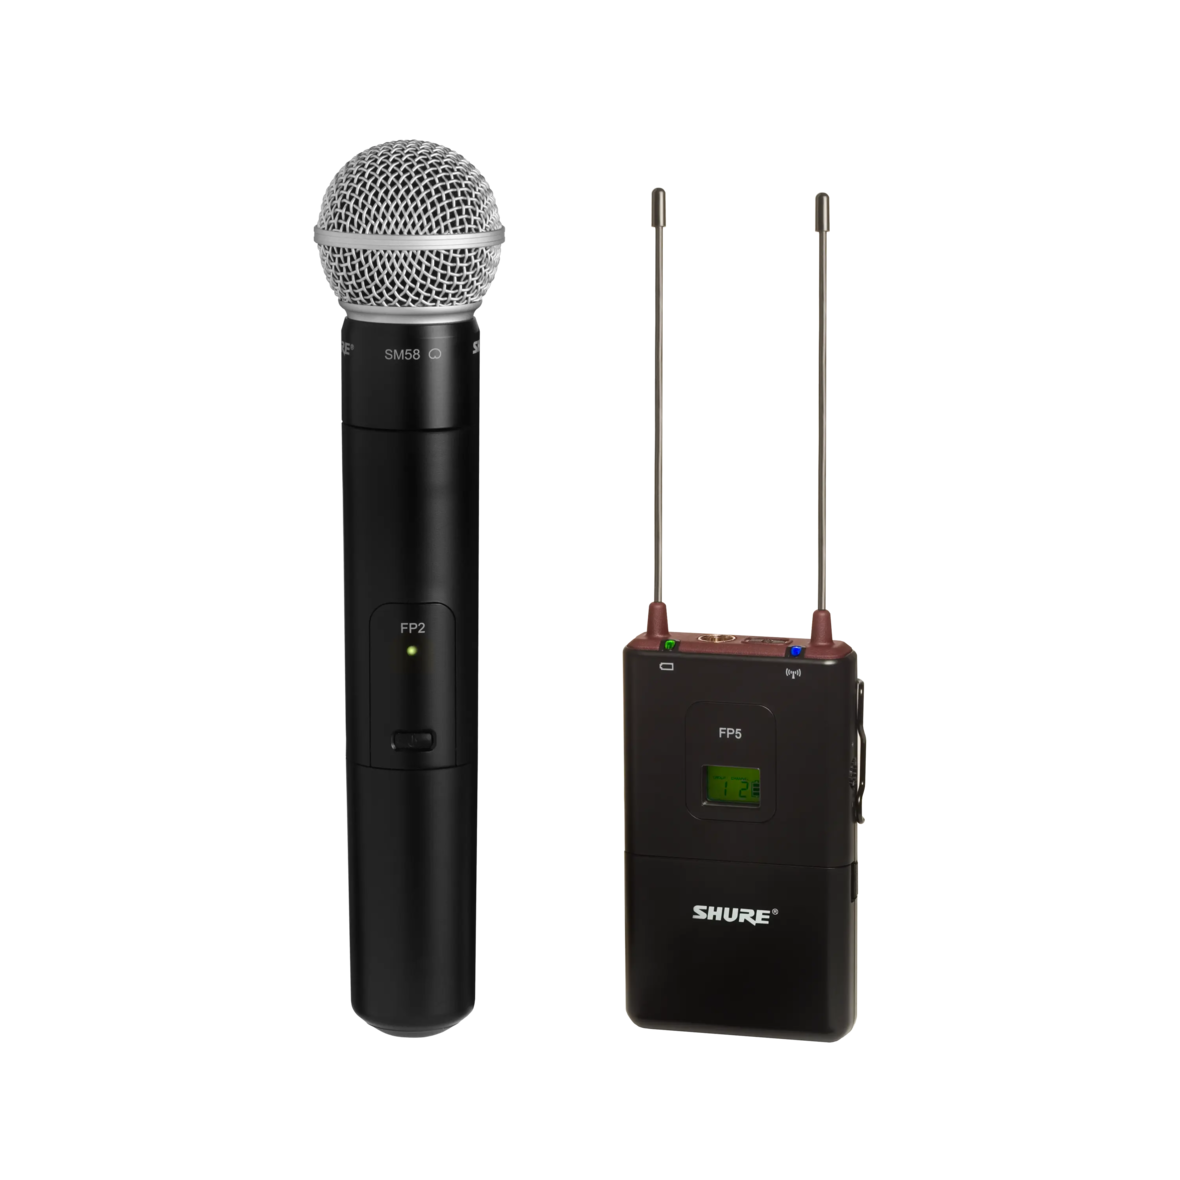 https://products.shureweb.eu/shure_product_db/product_main_images/files/ca6/00a/c2-/header_transparent/321a3bf9aea82af430304cacbccd8833.png